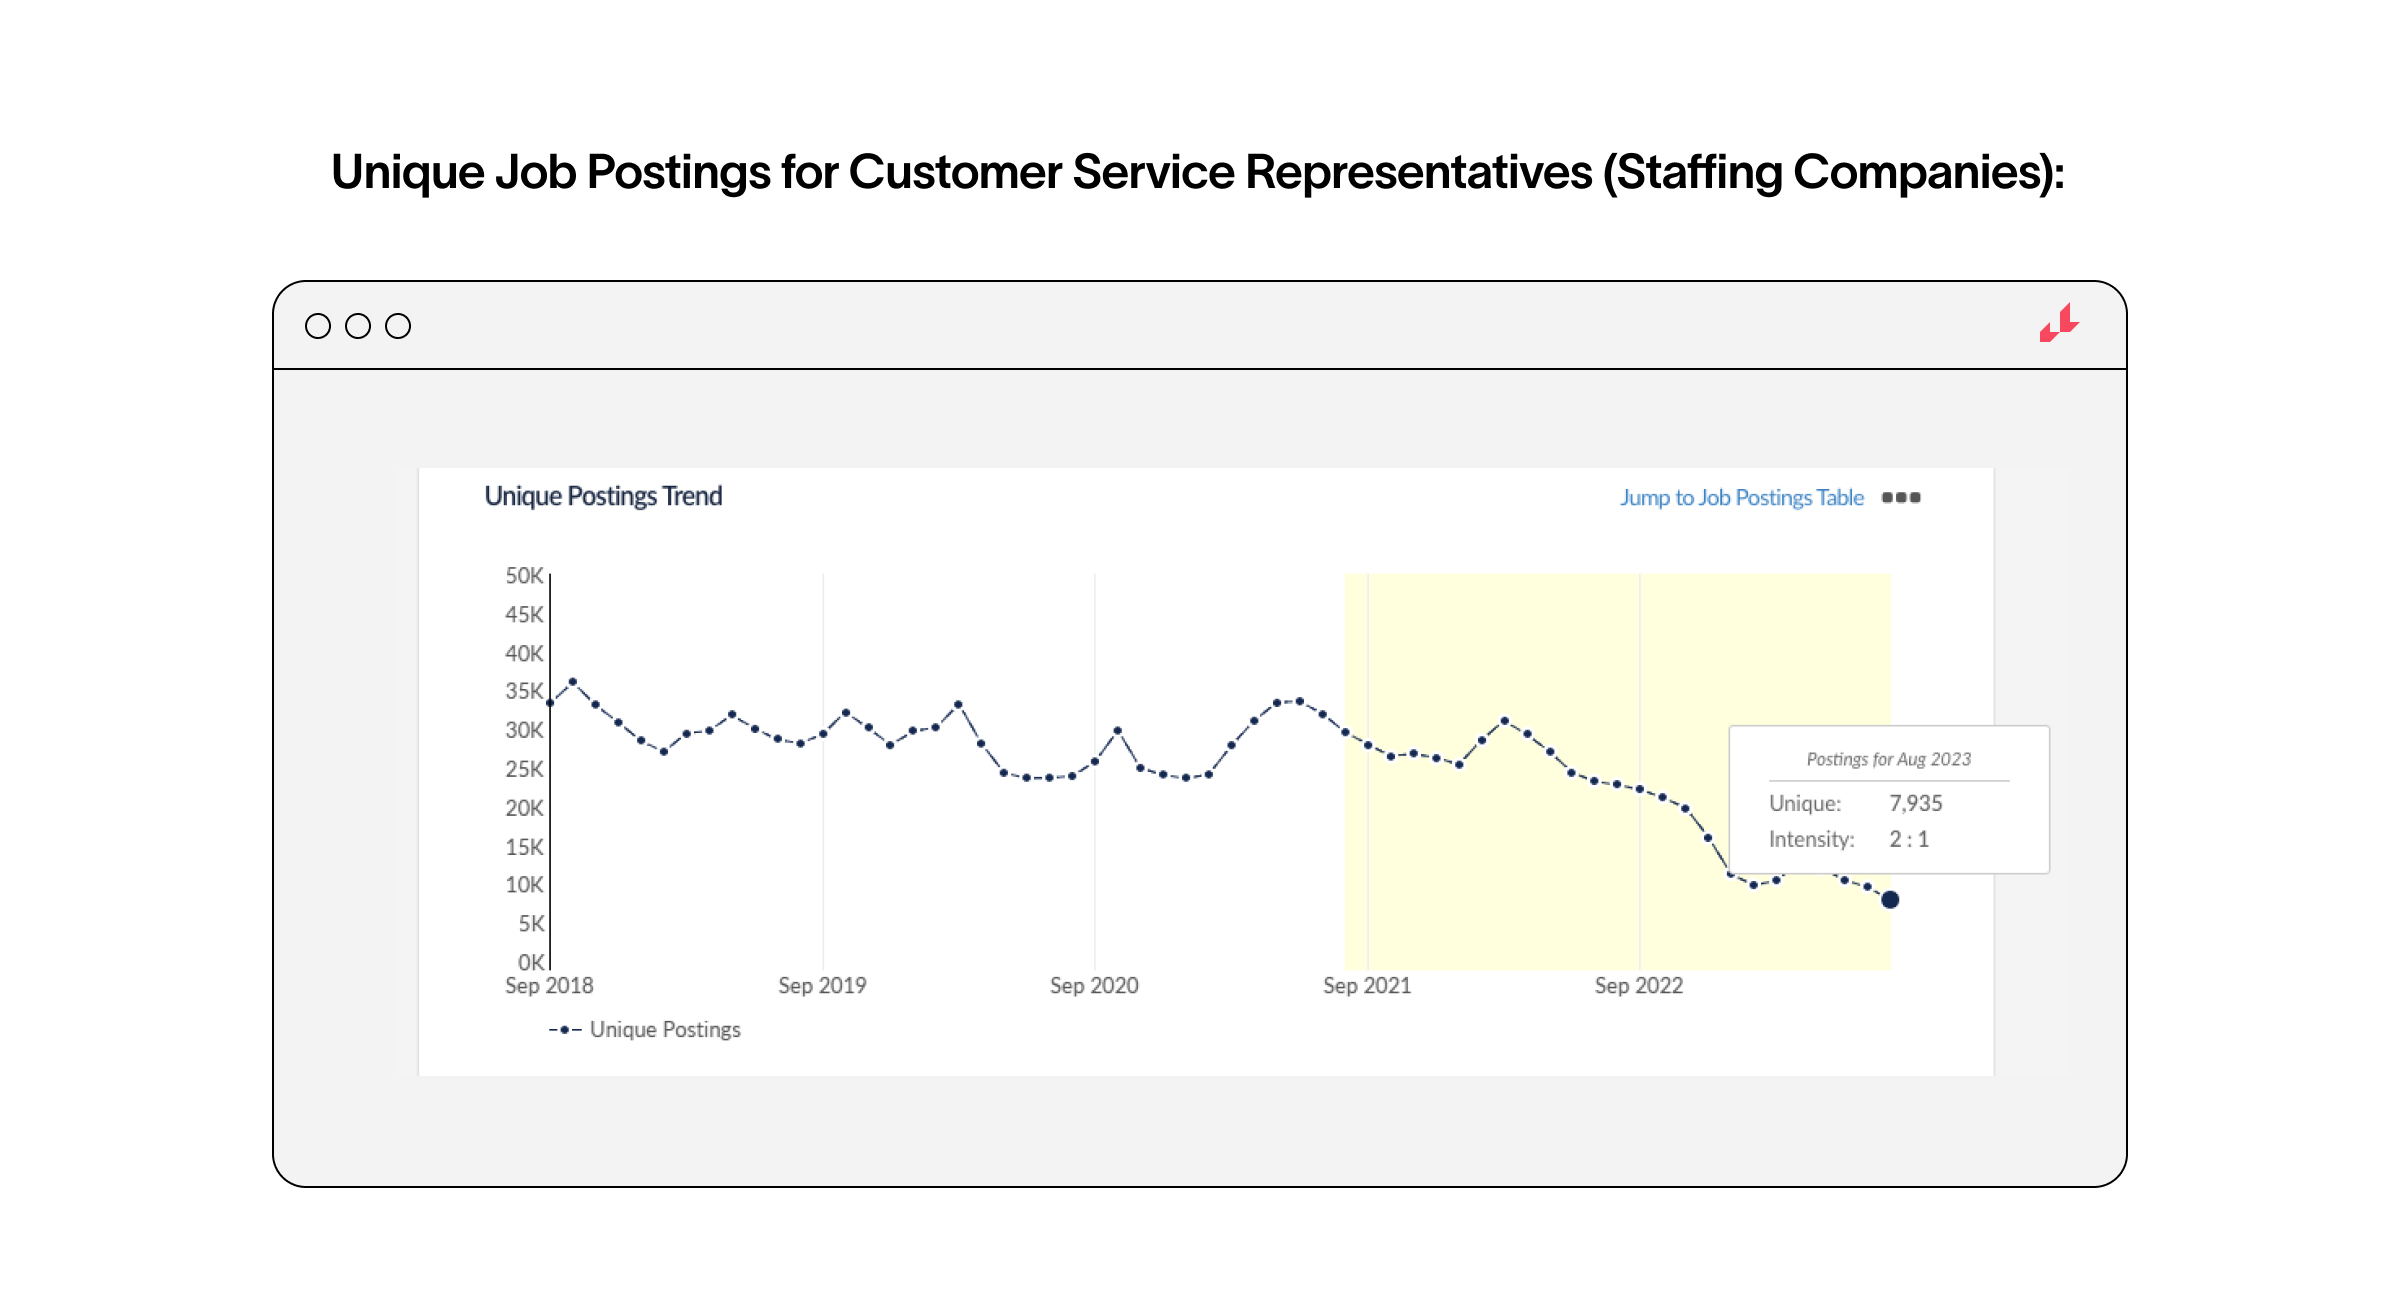 customer service representative postings by staffing companies